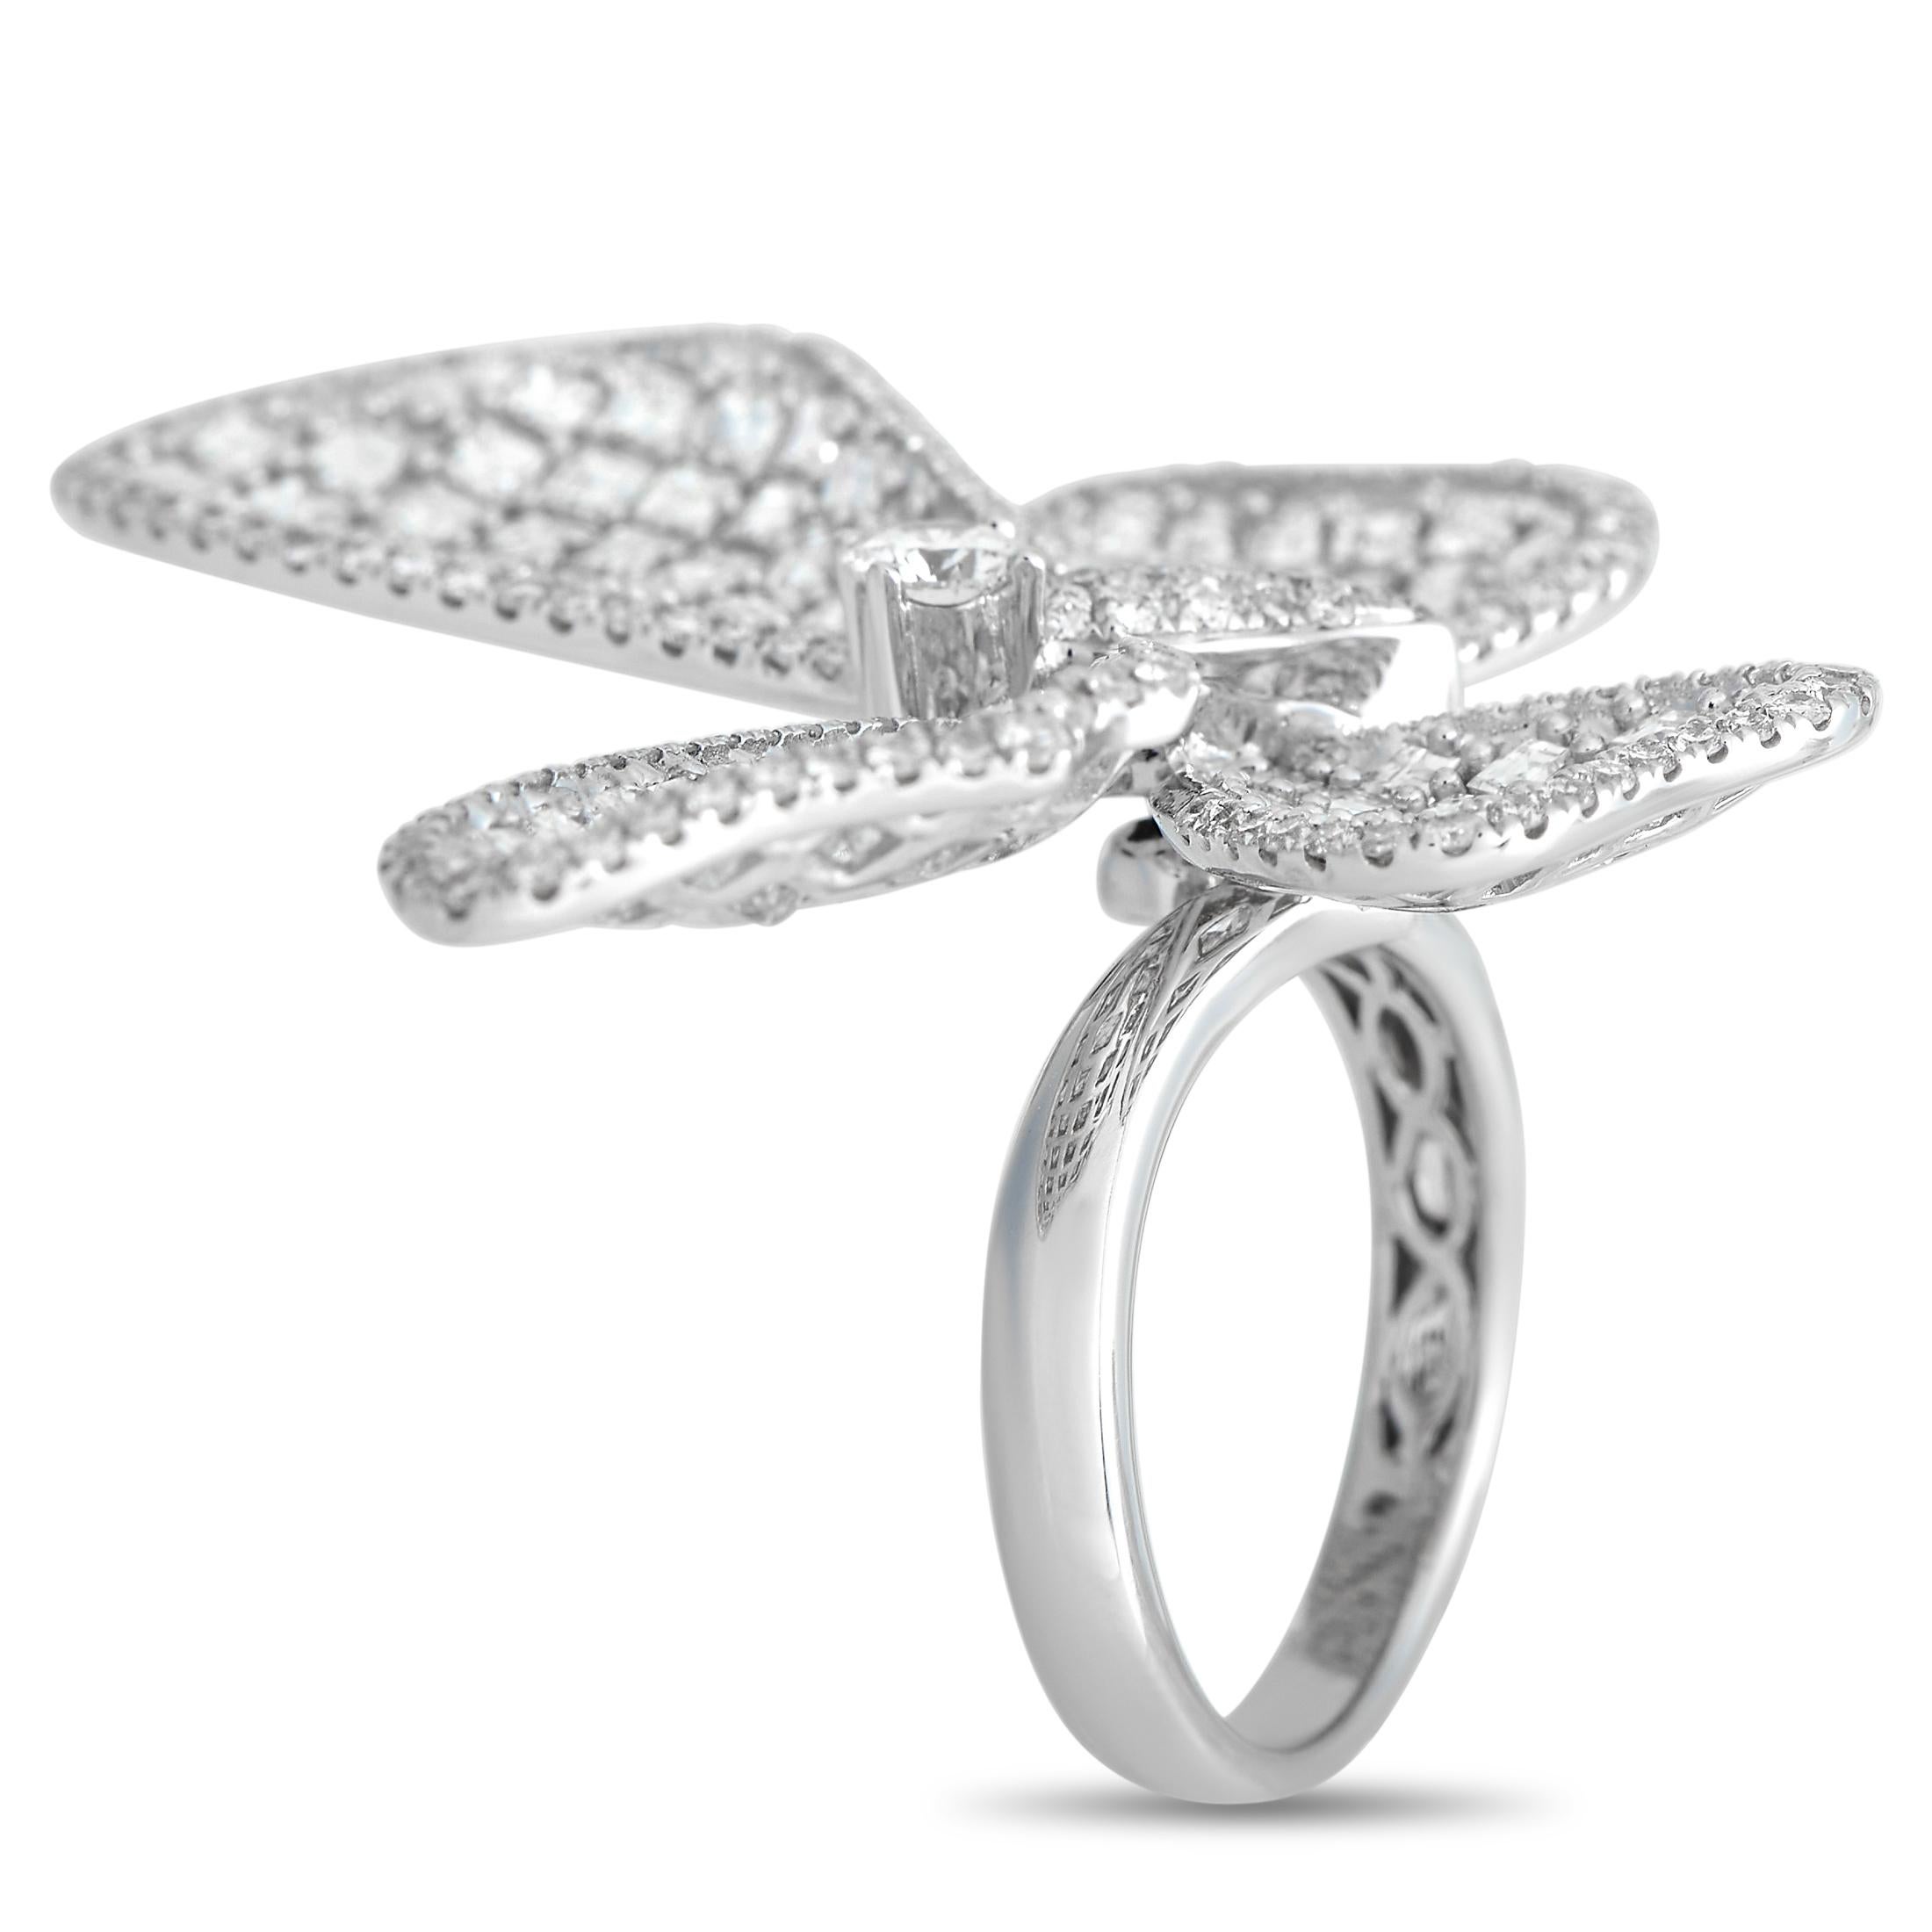 This stunner is a real showstopper. It has a sleek 3mm band in 18K white gold, with textured shoulders and a subtle bypass style. The ring is topped with an oversized, diamond-encrusted butterfly centerpiece that glitters non-stop. A larger round